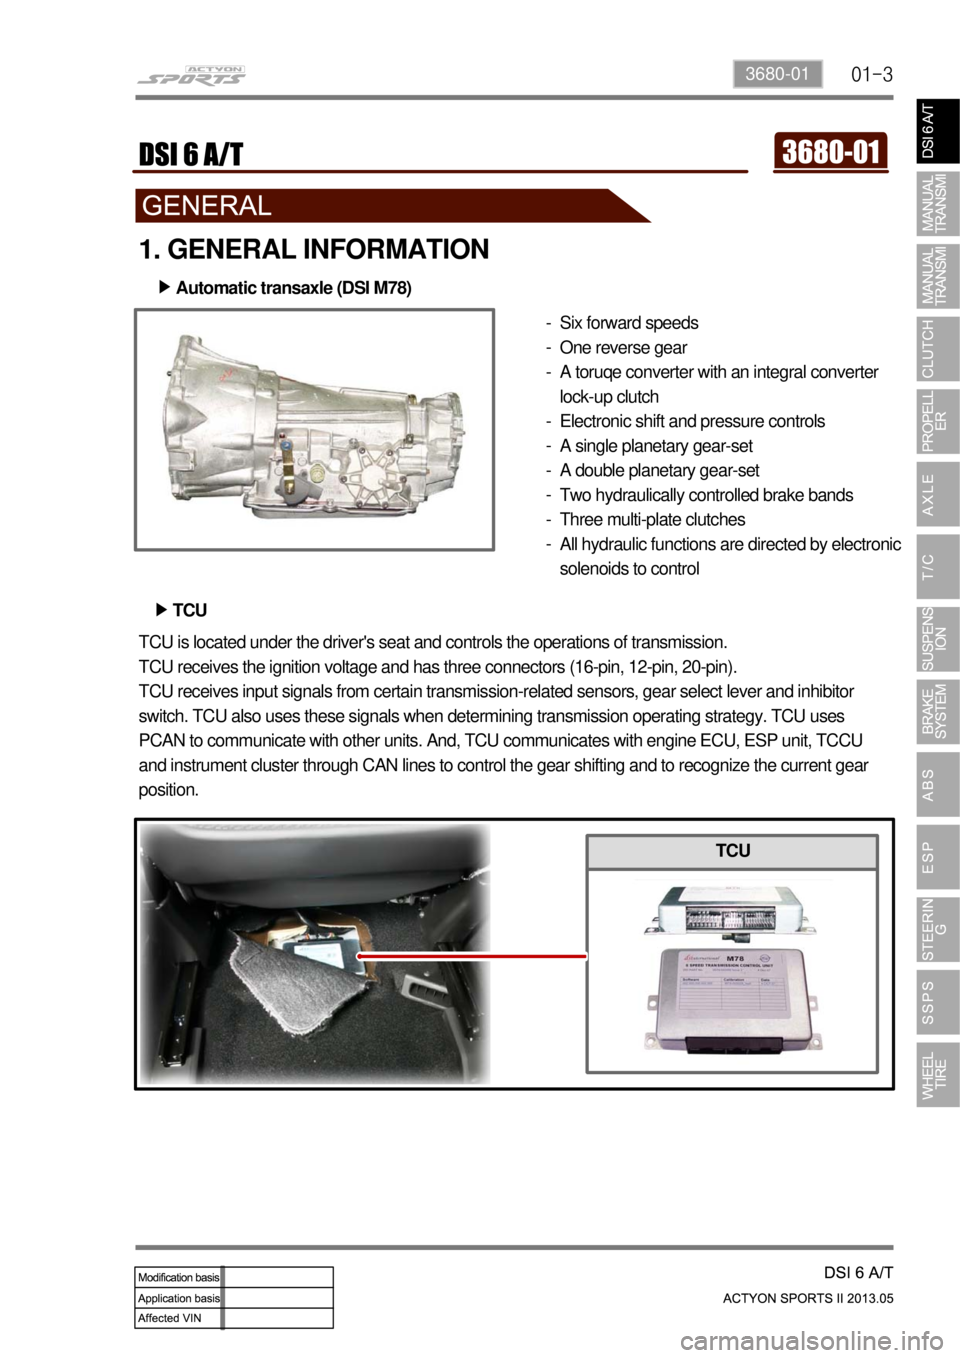 SSANGYONG NEW ACTYON SPORTS 2013  Service Manual 01-33680-01
1. GENERAL INFORMATION
Six forward speeds
One reverse gear
A toruqe converter with an integral converter 
lock-up clutch
Electronic shift and pressure controls
A single planetary gear-set
